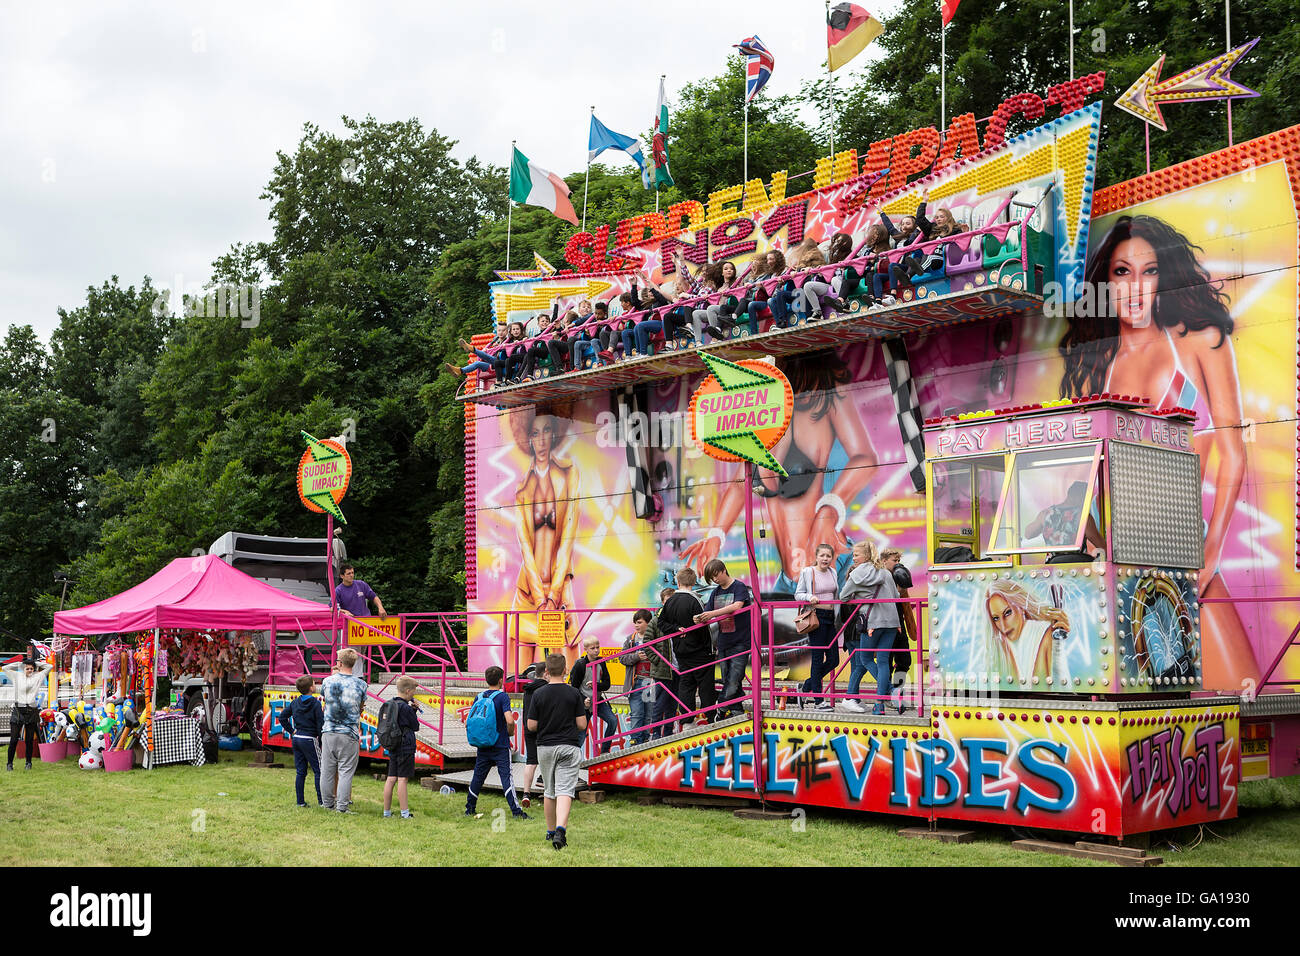 Sudden Impact fairground ride in action with people standing watching Stock Photo